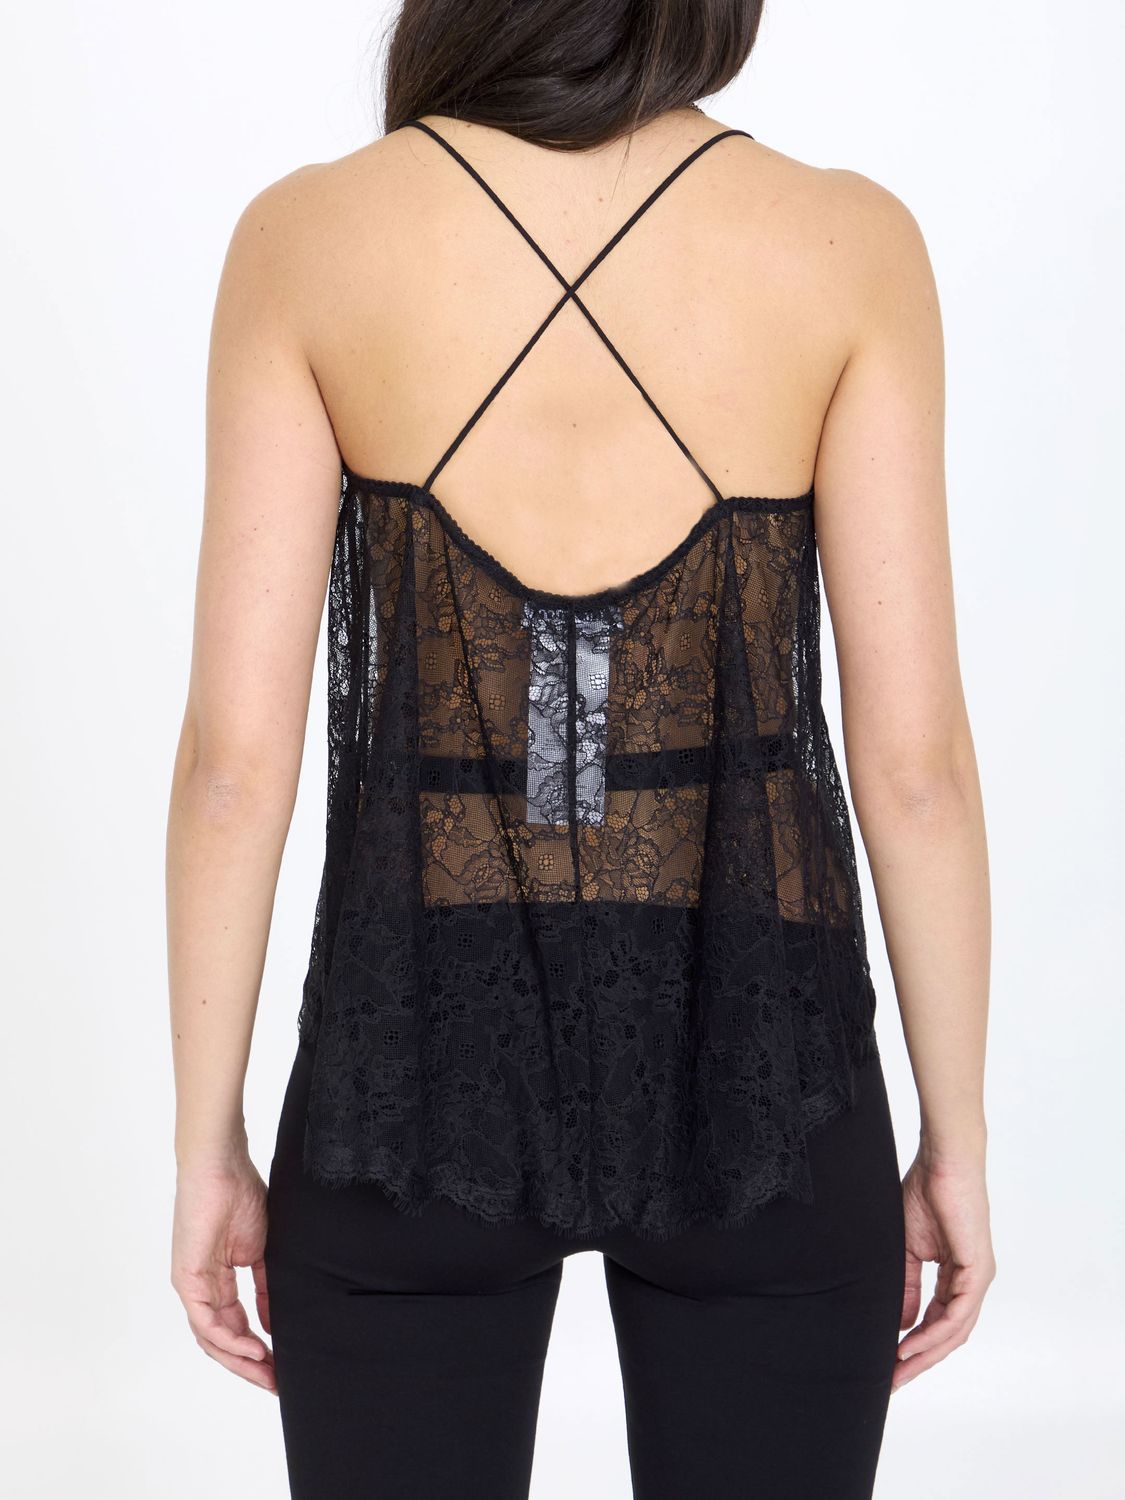 THE ATTICO Black Lace Top with Cut-Out Details, Crossover Straps and Adjustable Chain